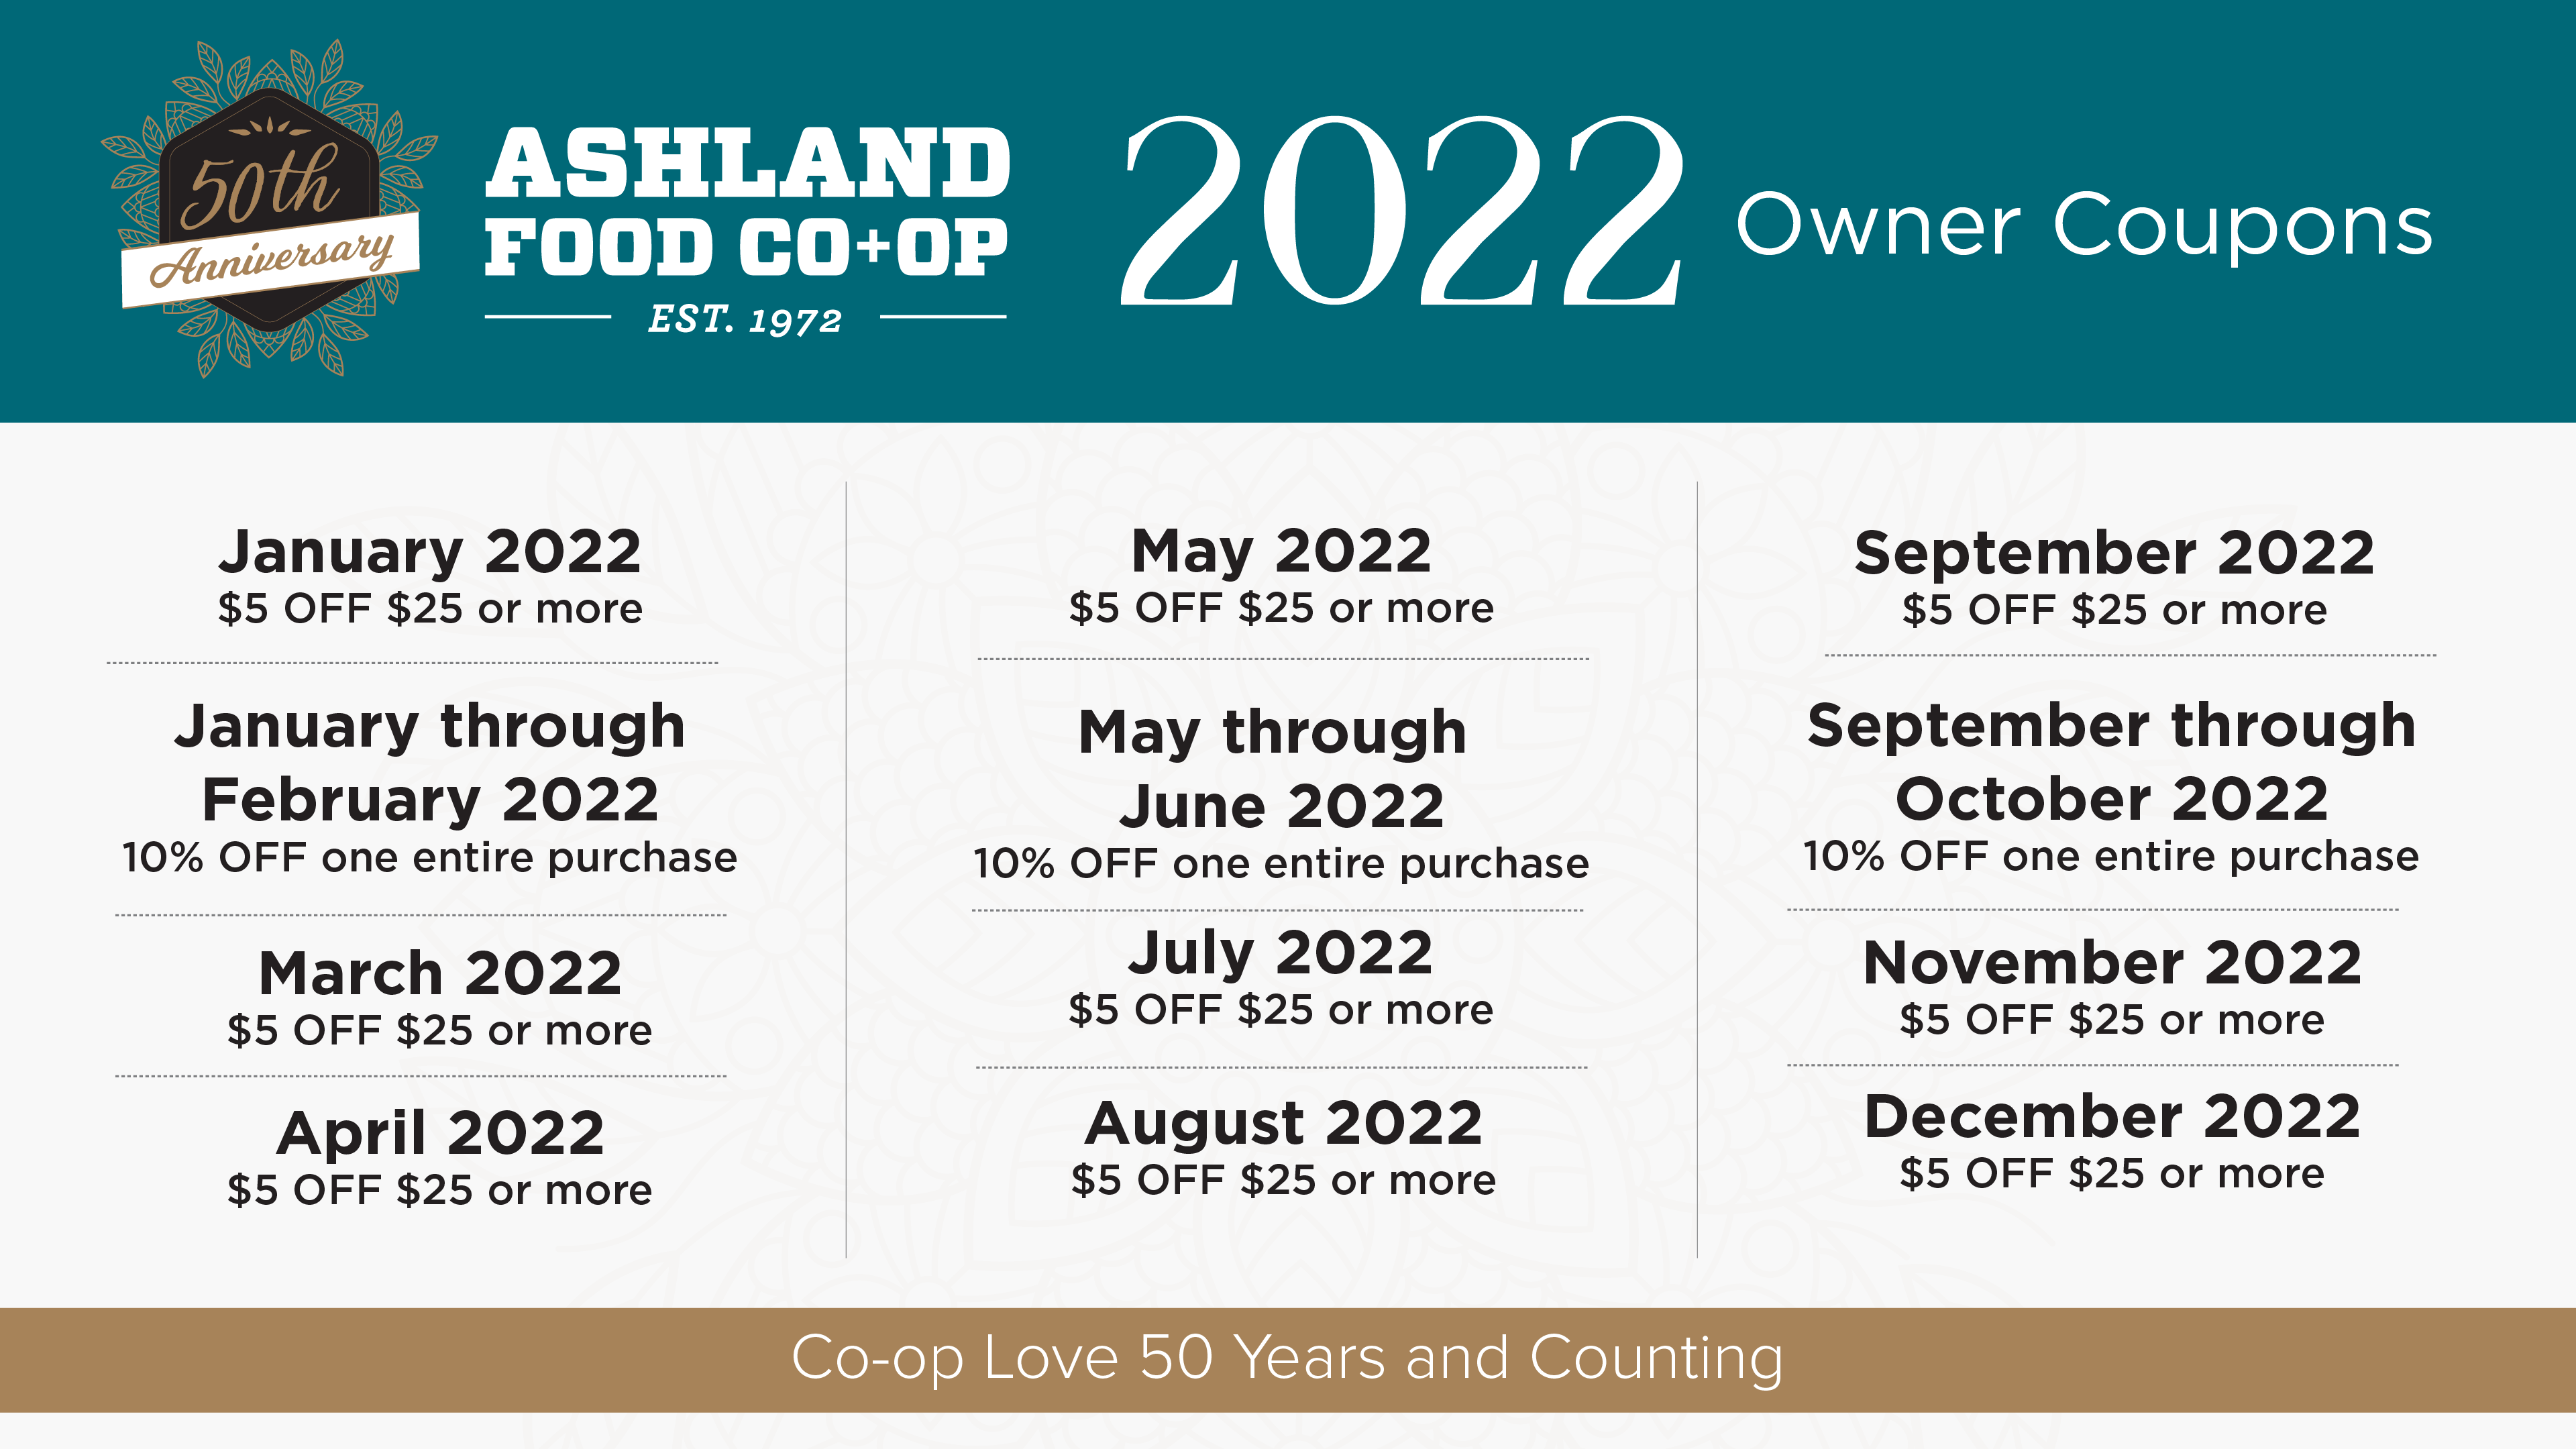 Ashland Food Co-op 2022 Owner Coupon Schedule